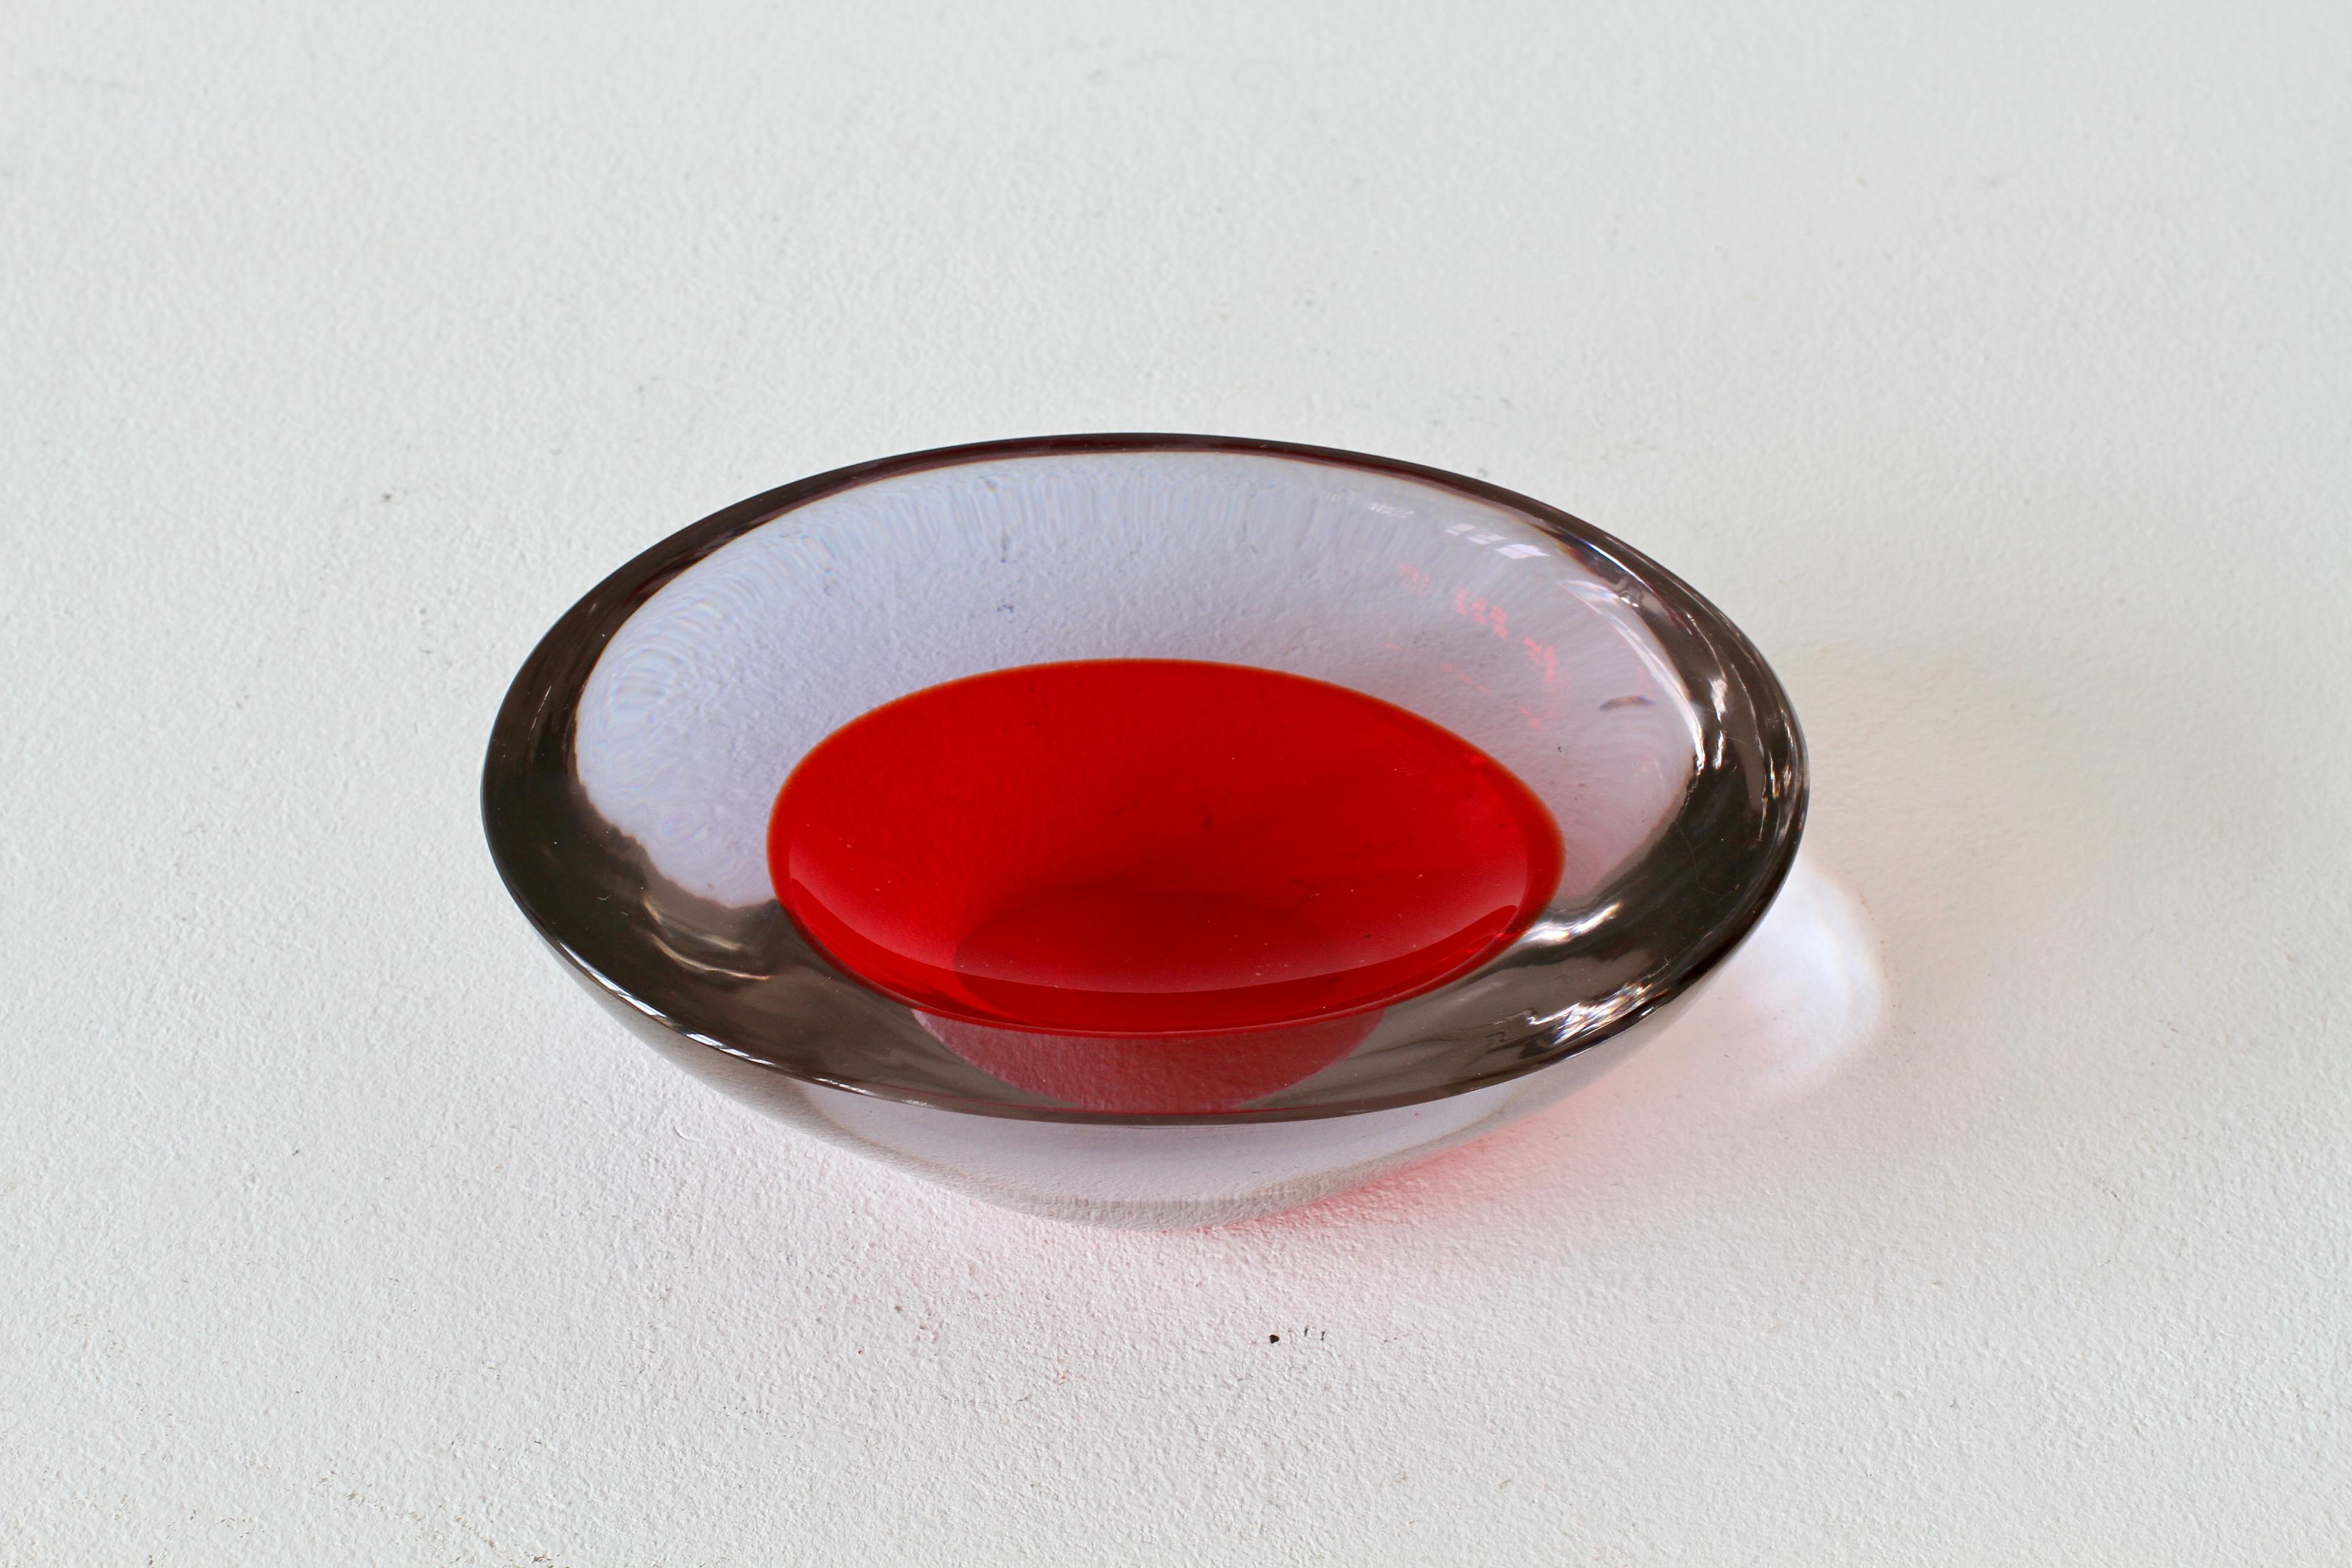 Large Cenedese Italian Asymmetric Red Sommerso Murano Glass Bowl Dish or Ashtray For Sale 9